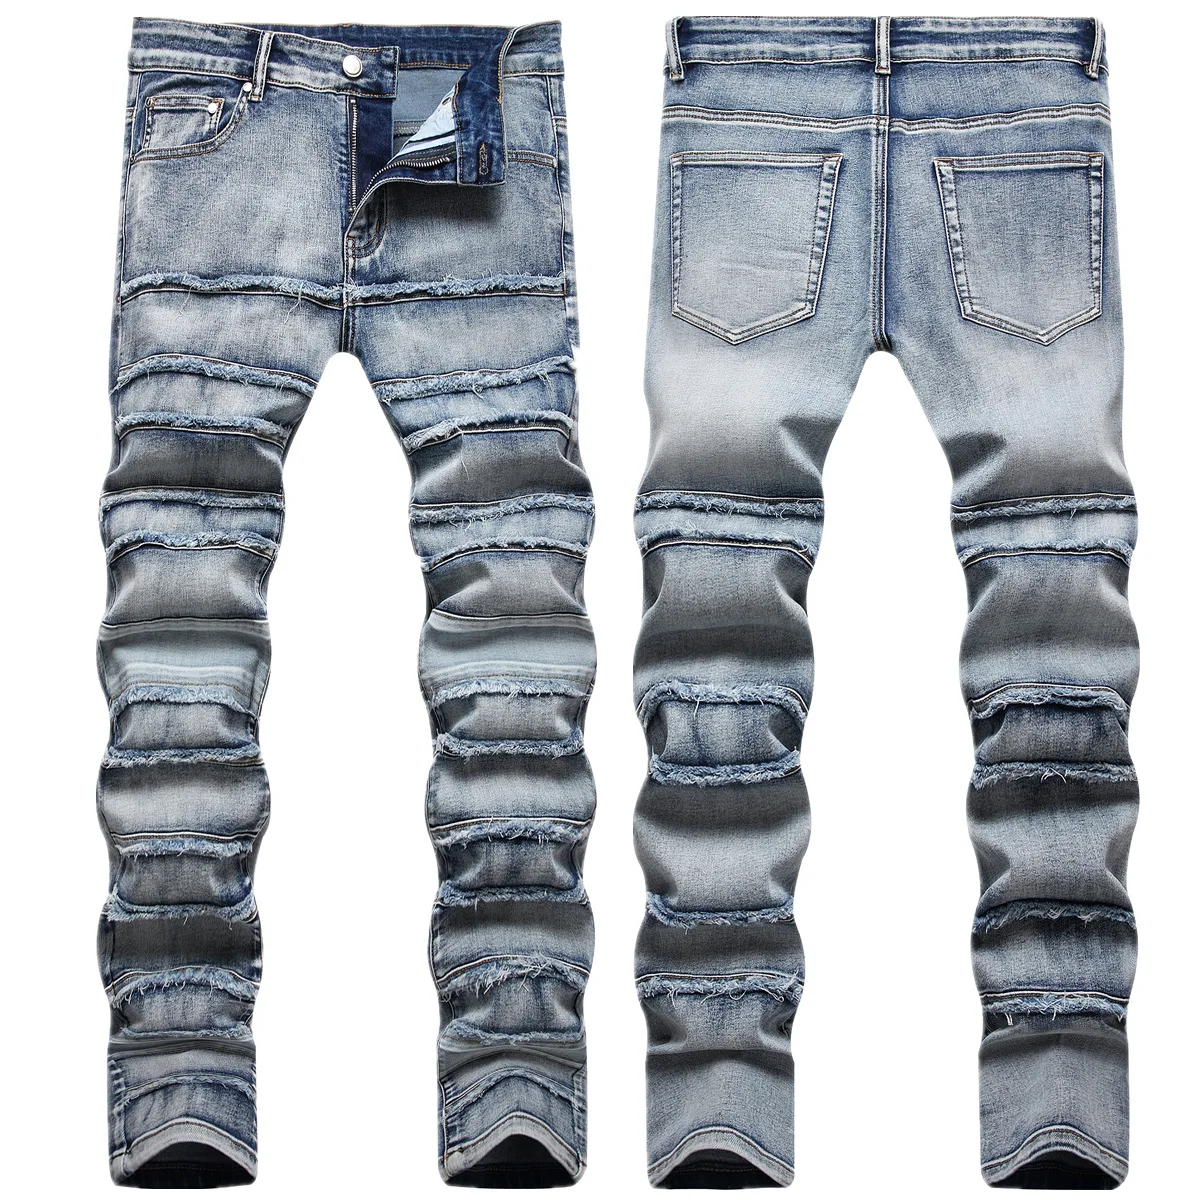 

2023 New Fashion Men's Ripped Distressed Destroyed Straight Fit Denims Pants Skinny Casual Fashion Jeans Stacked Patches Jeans